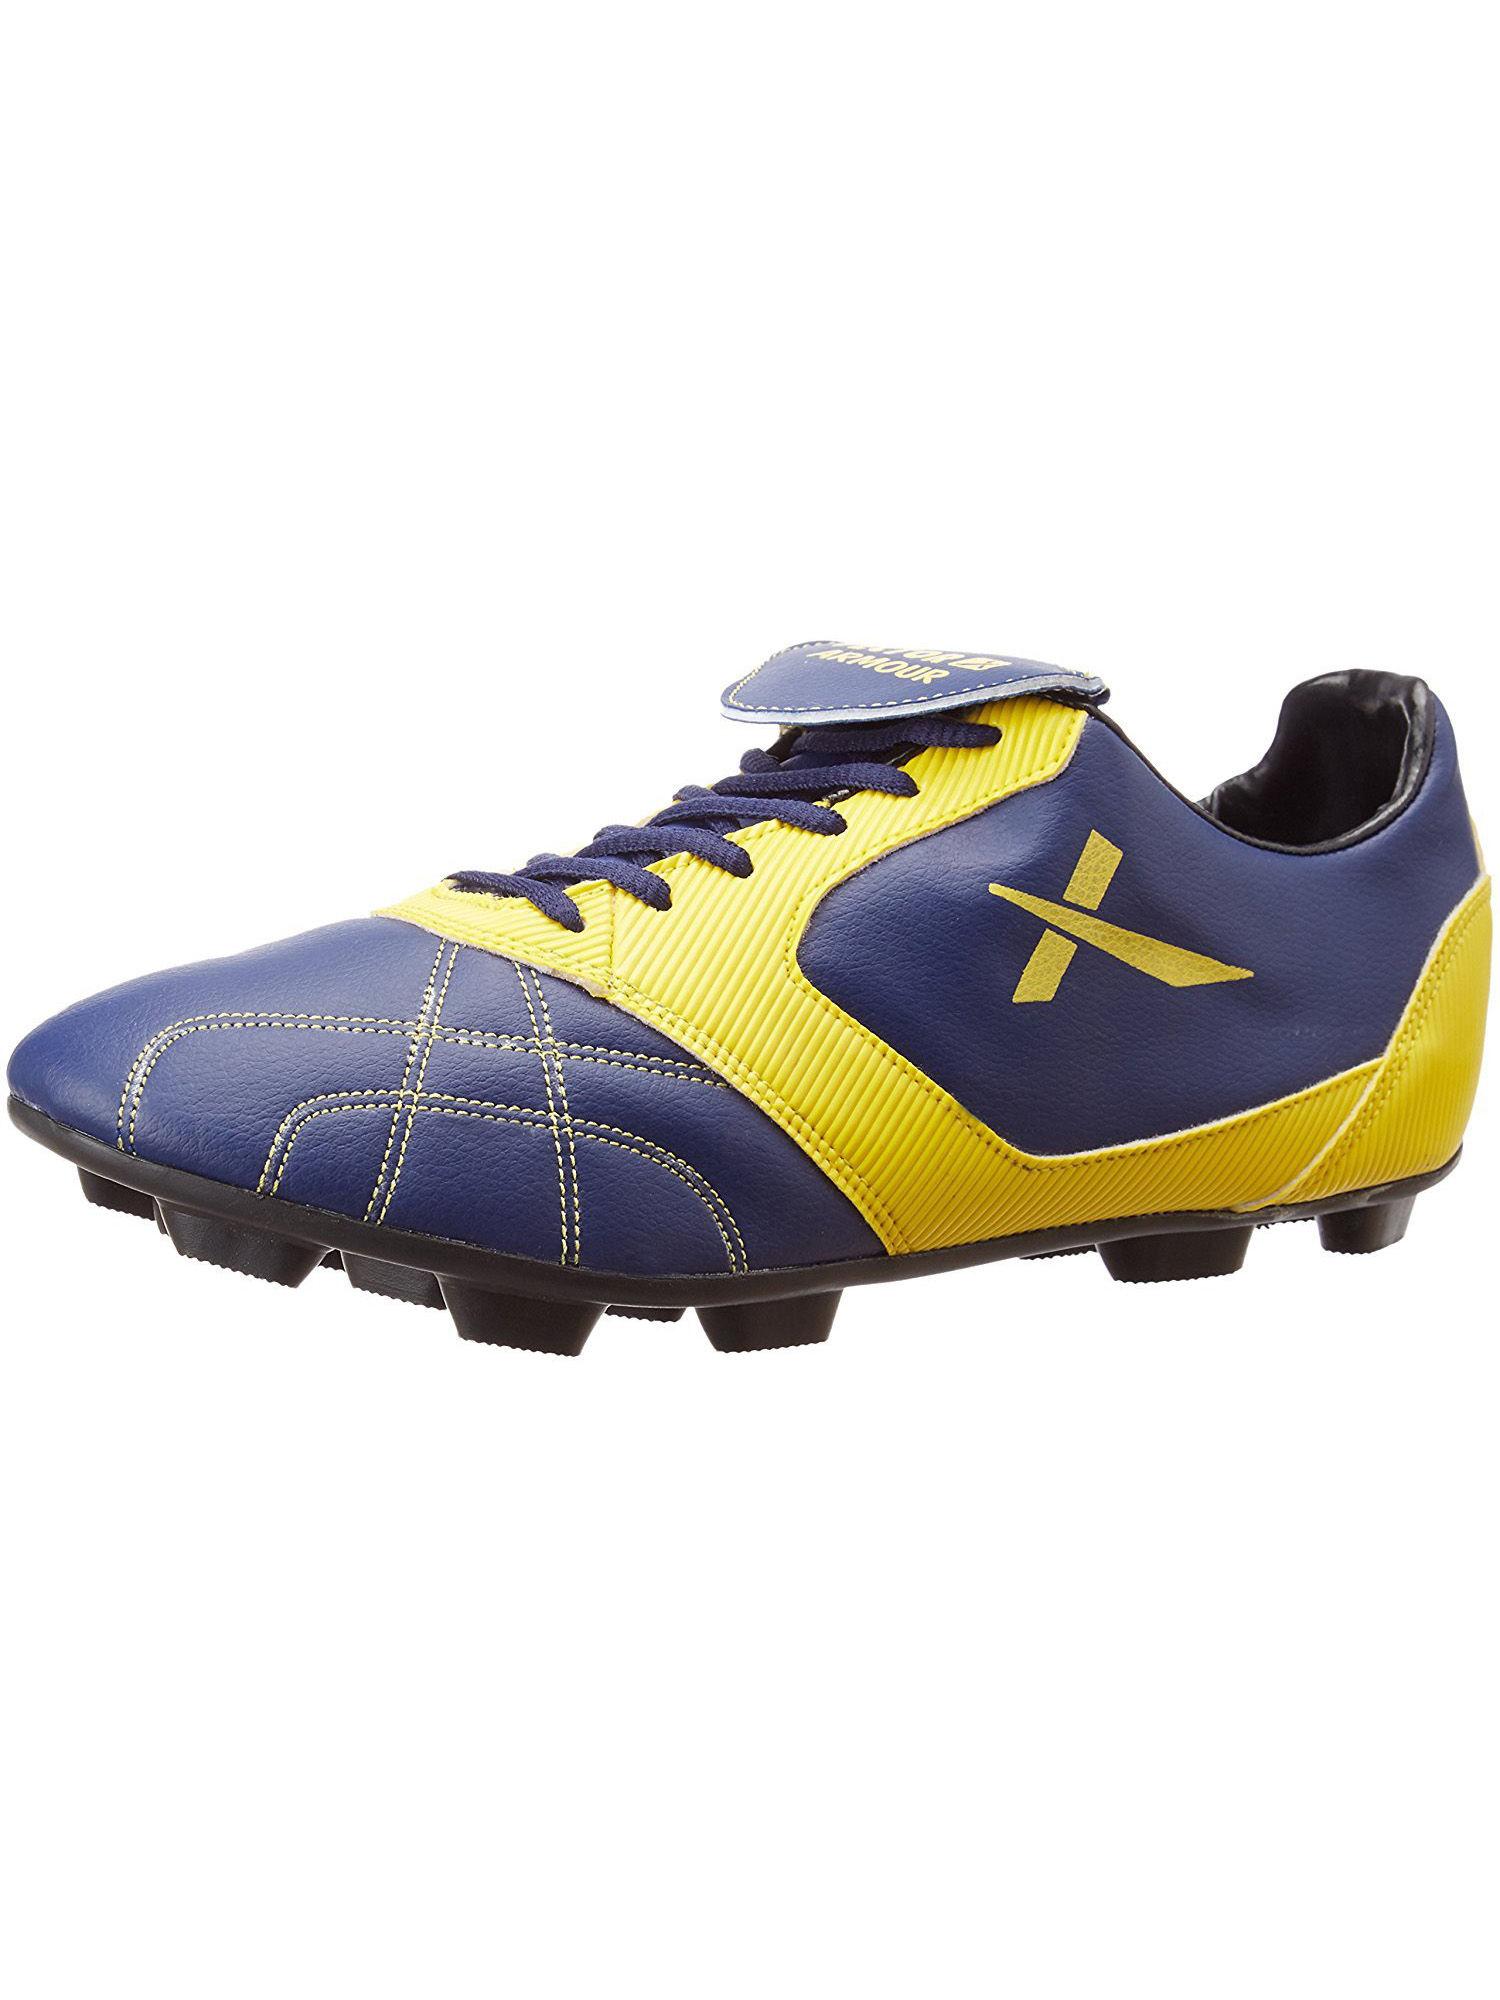 armour-football-shoes-for-men---blue---yellow